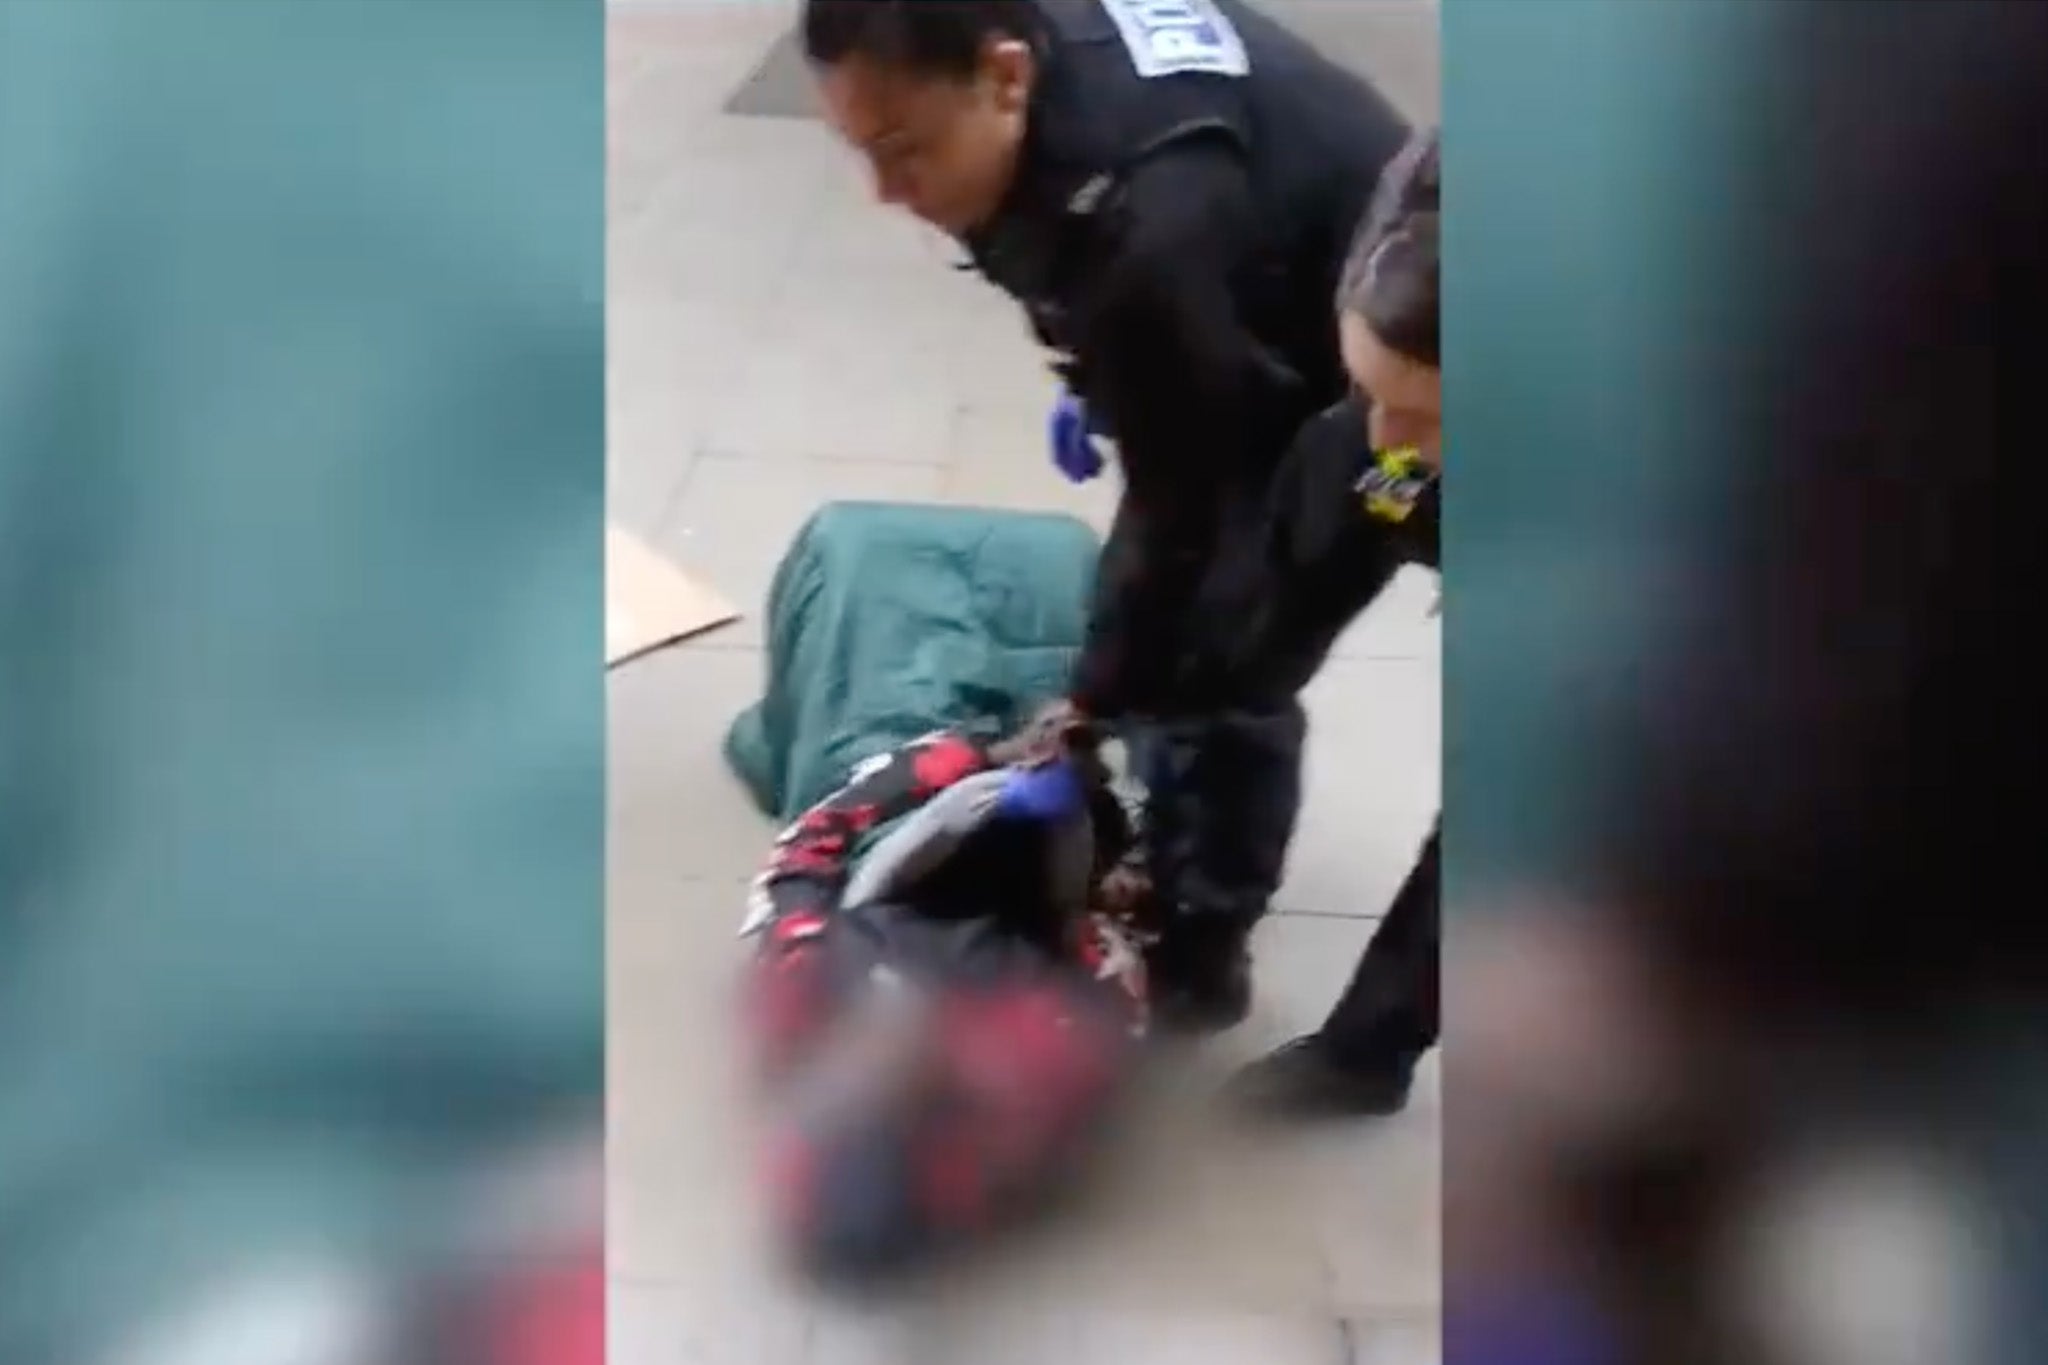 The police officer first drags the man by his sleeping bag away